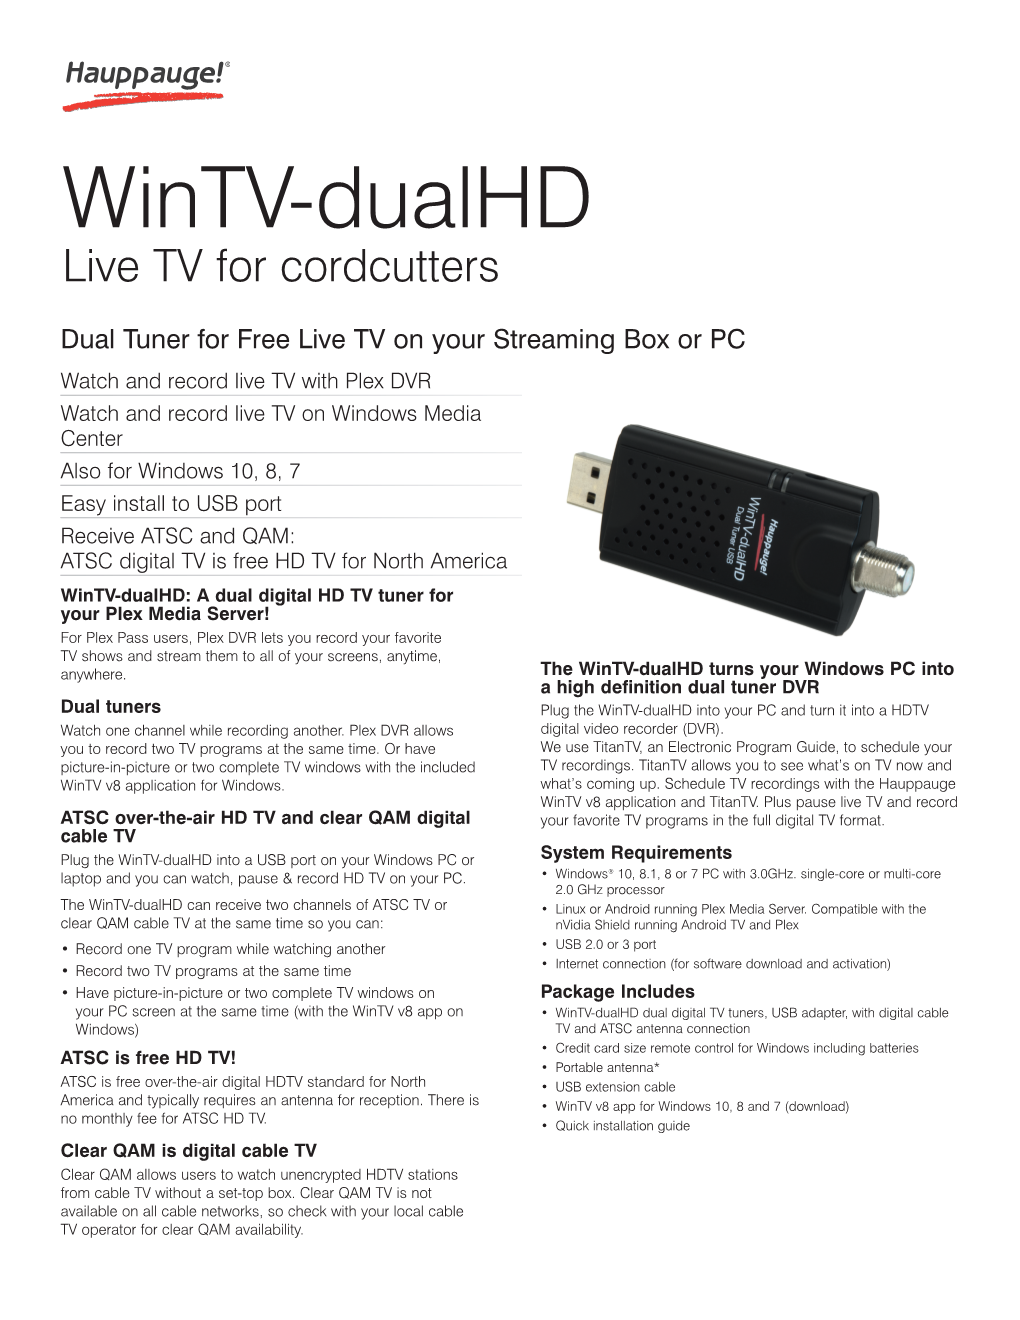 Wintv-Dualhd Live TV for Cordcutters